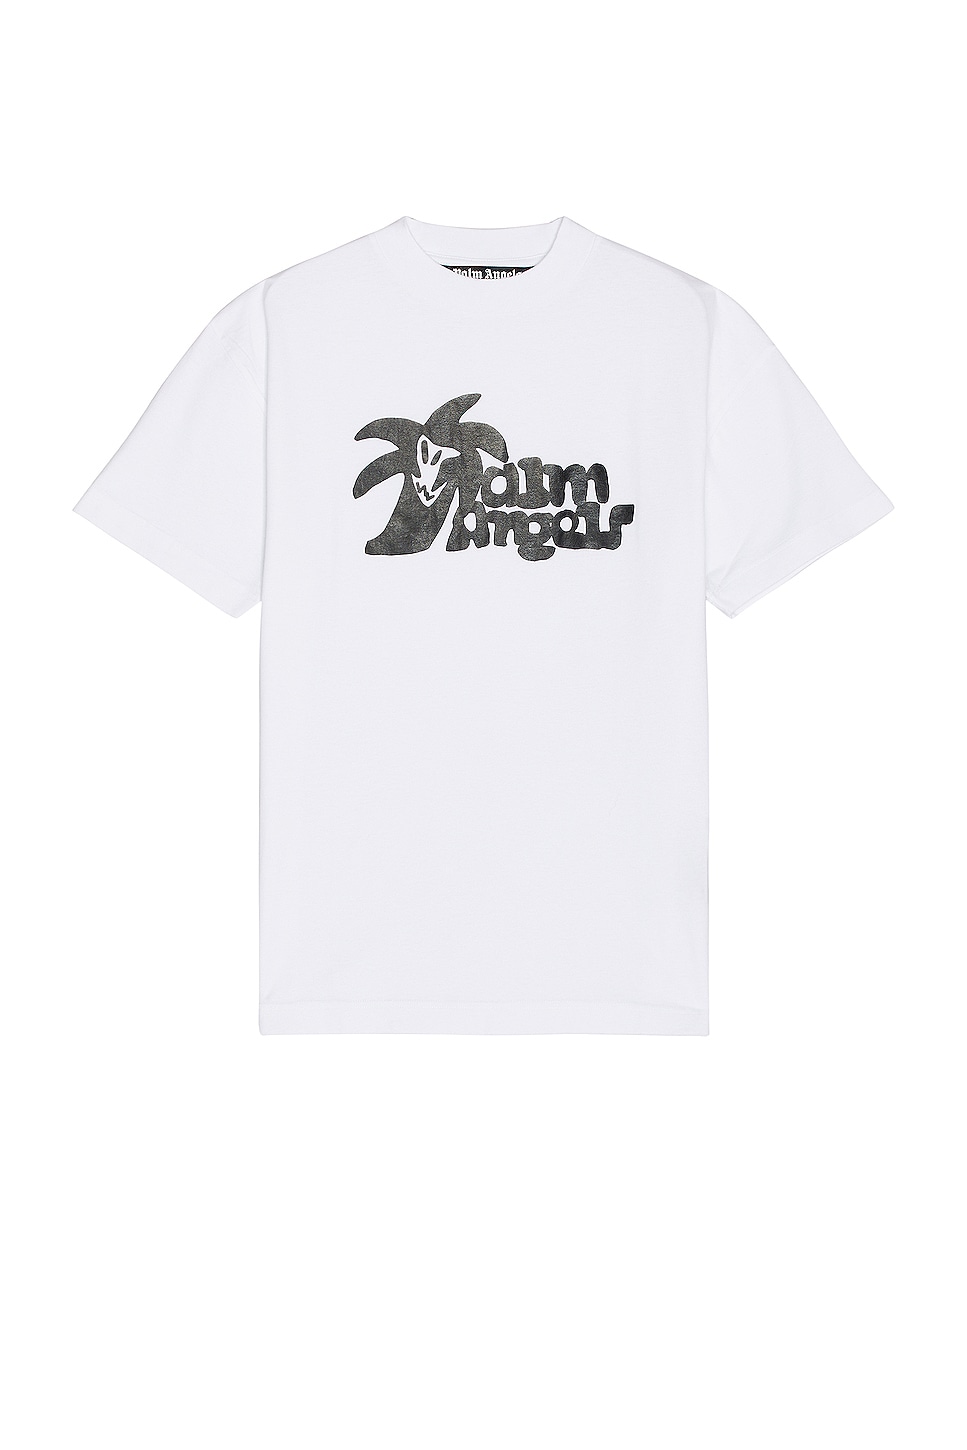 Image 1 of Palm Angels Hunter Classic Tee in White & Black